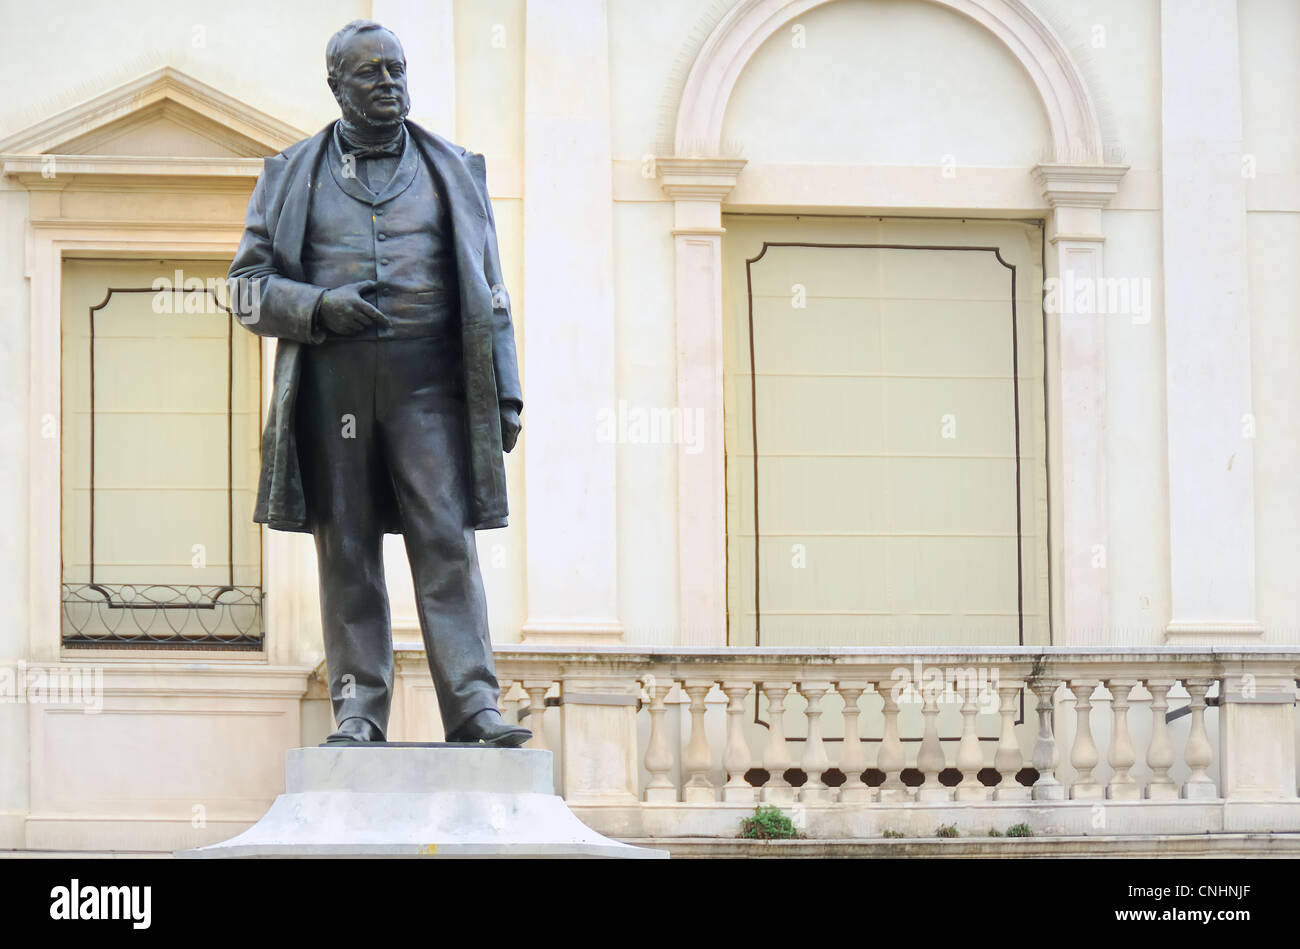 Padua, Italy : Piazza Cavour ( Cavour Square) : the statue of Camillo Benso Count of Cavour. Stock Photo